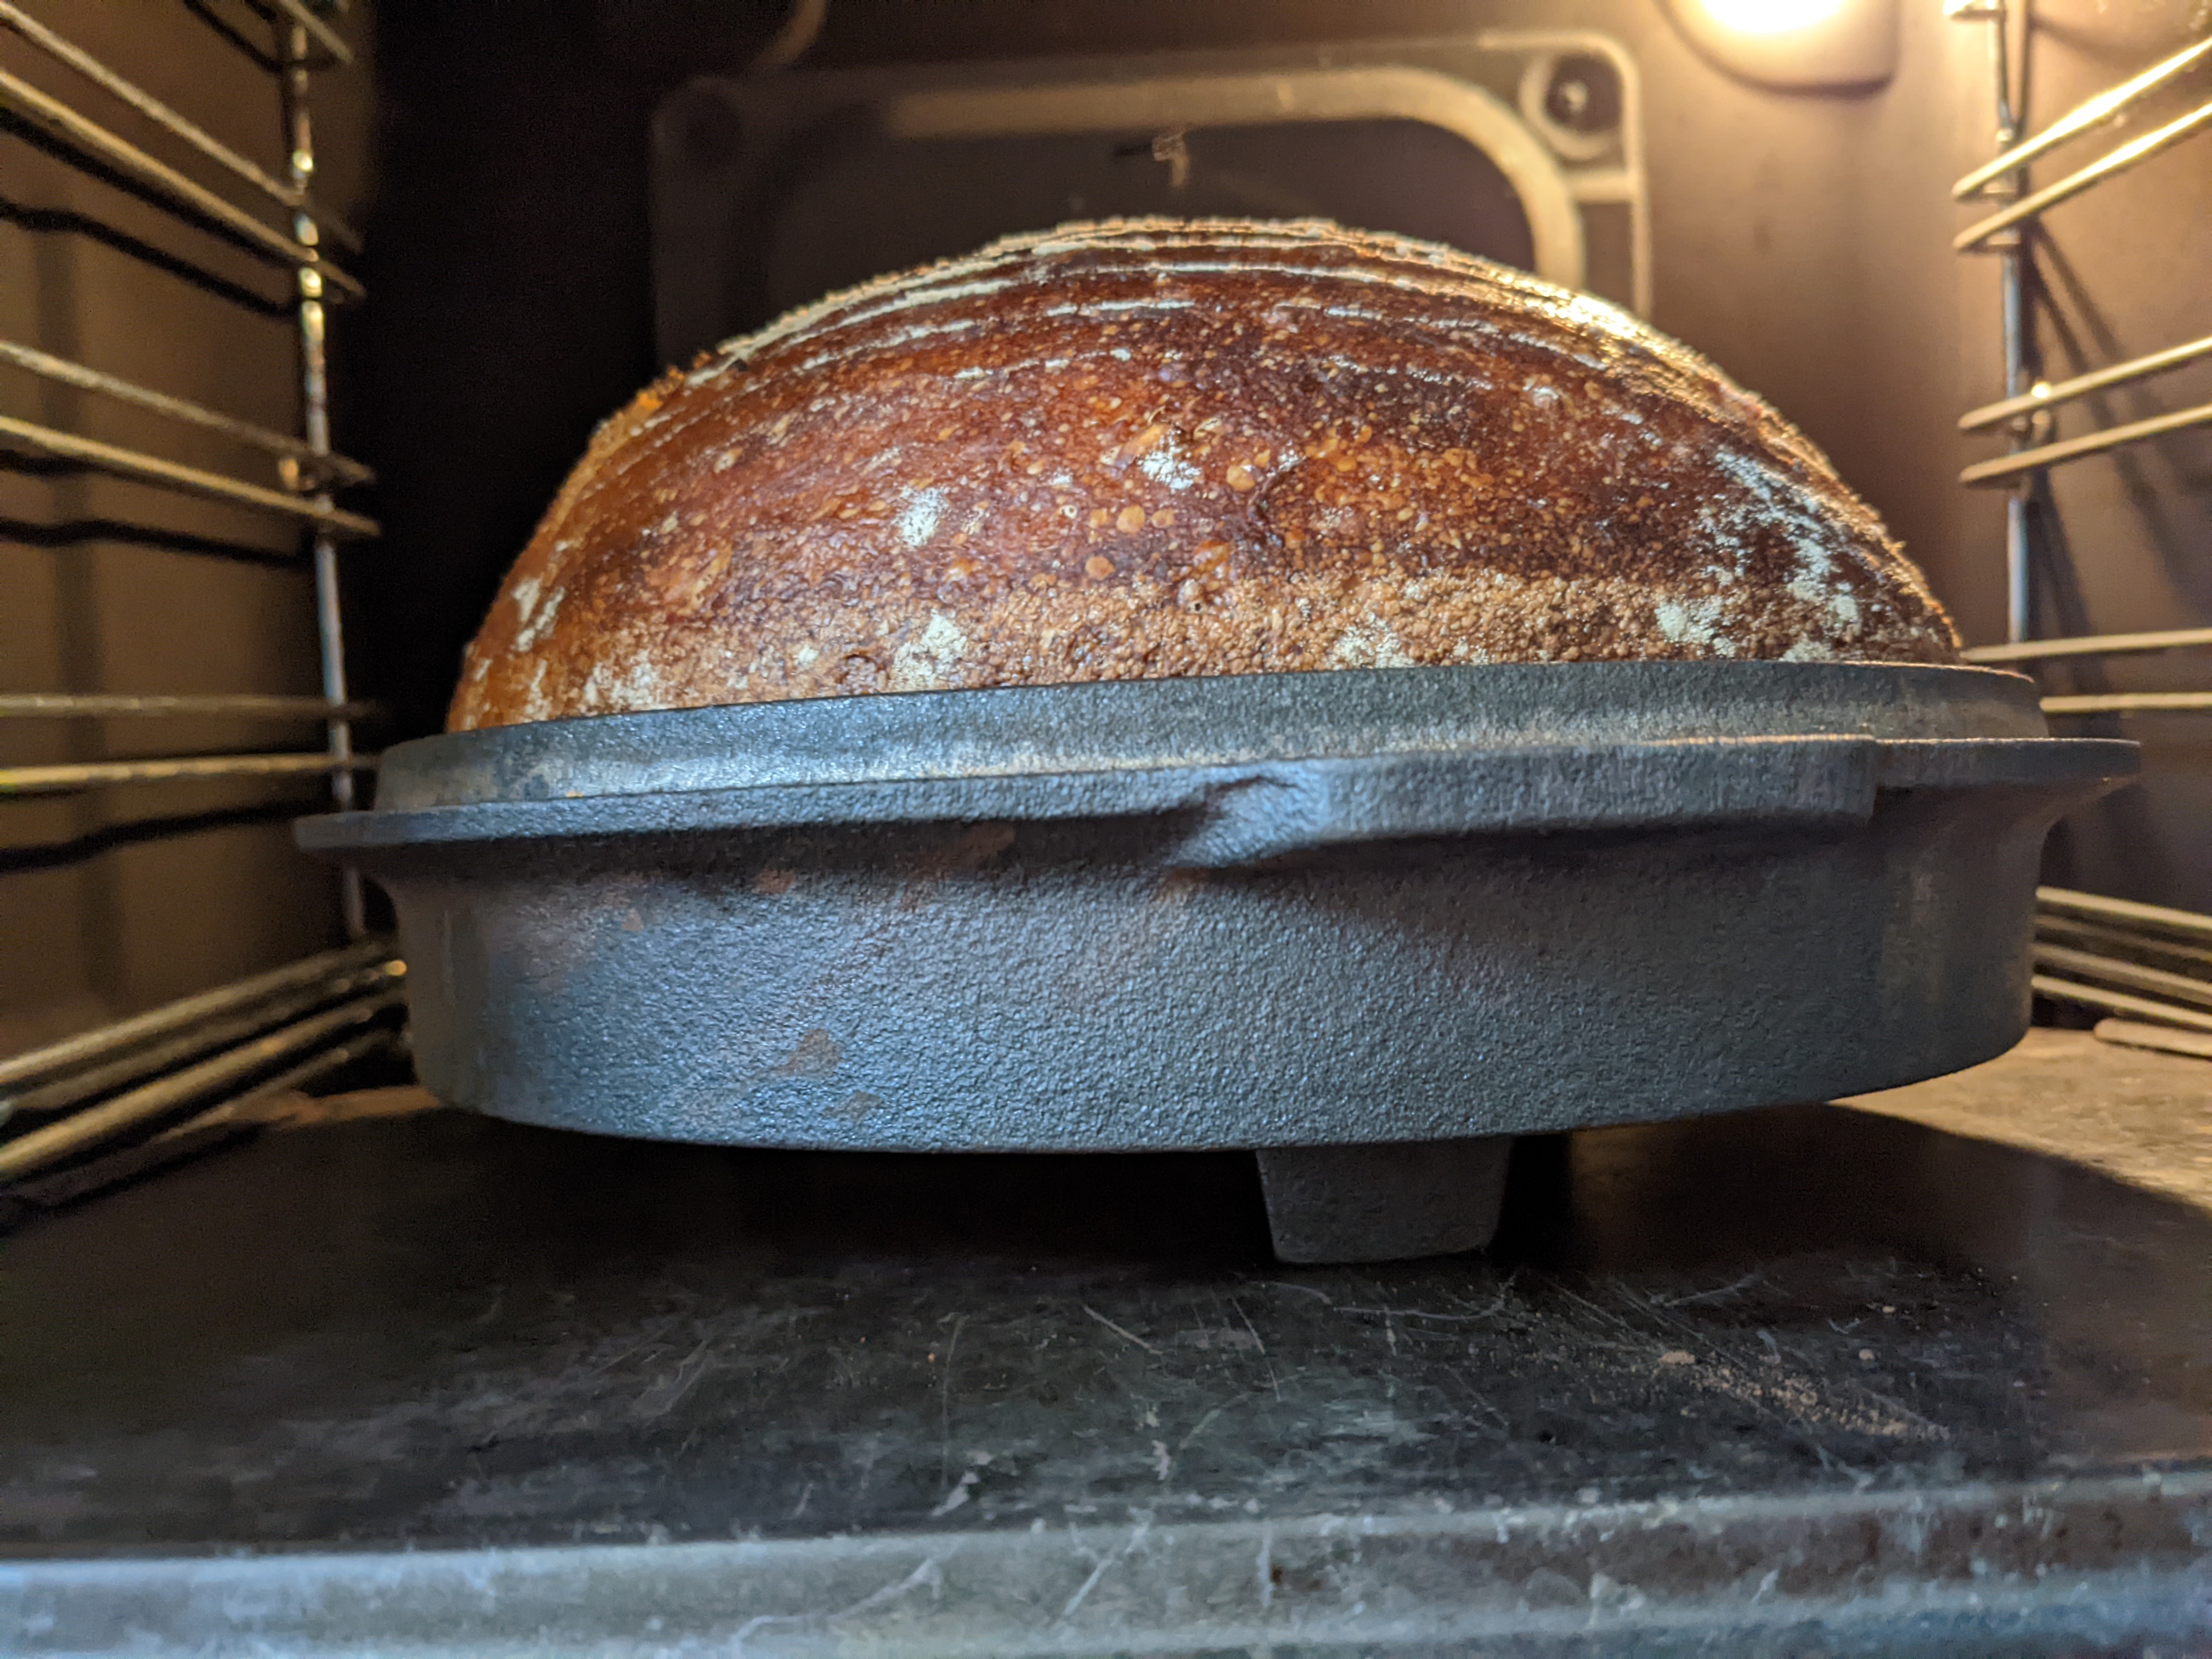 inverted dutch oven